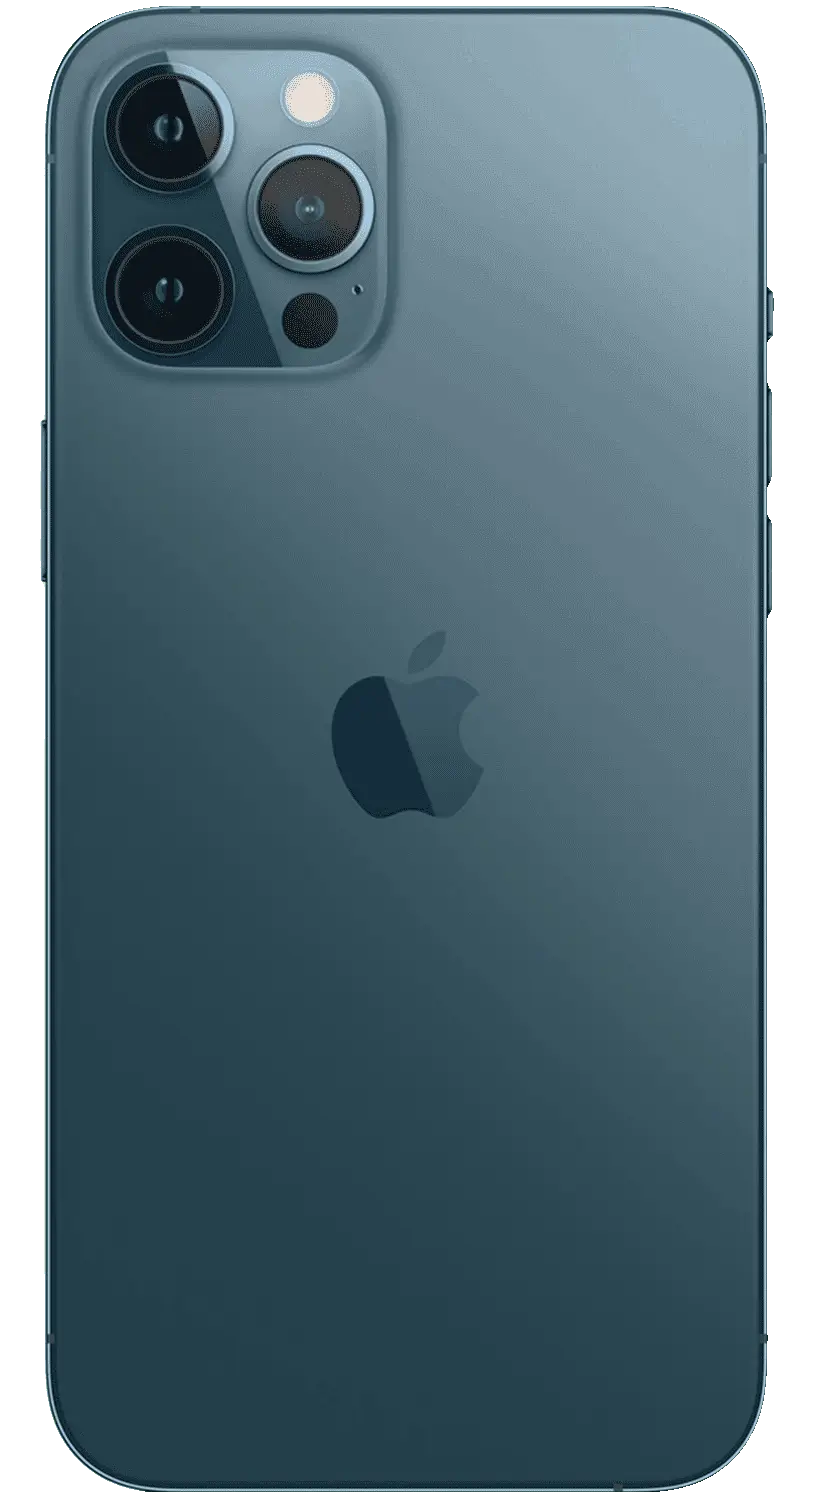 iphone 12m front